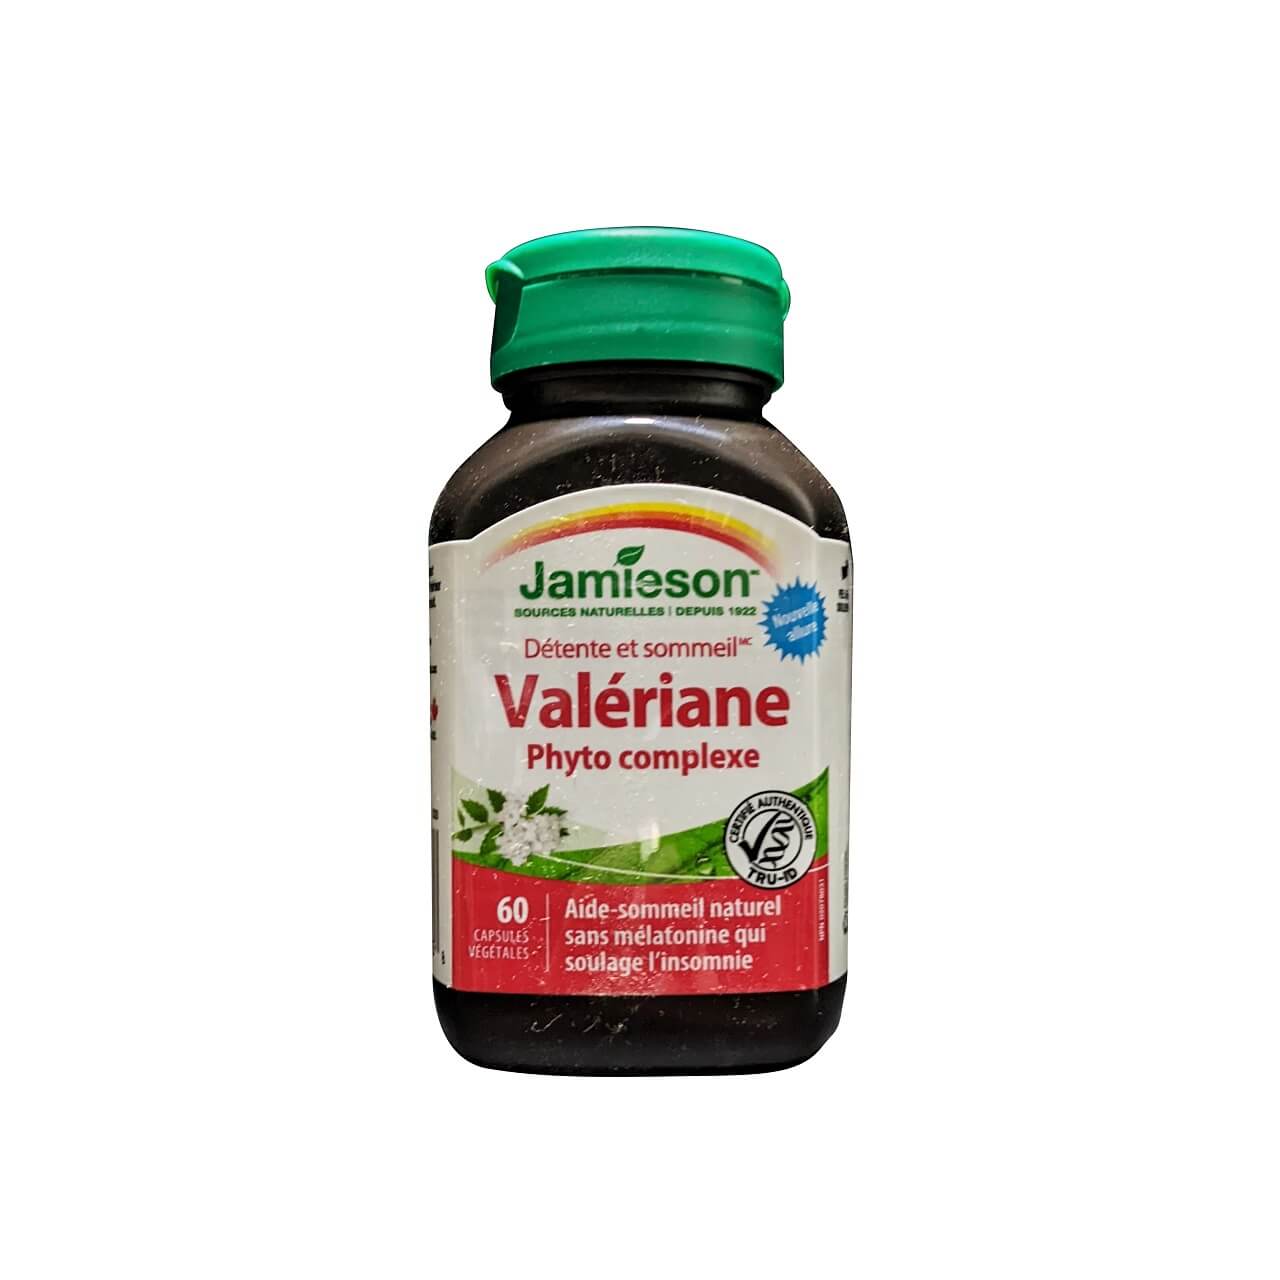 Product label for Jamieson Valerian Herbal Complex (60 capsules) in French